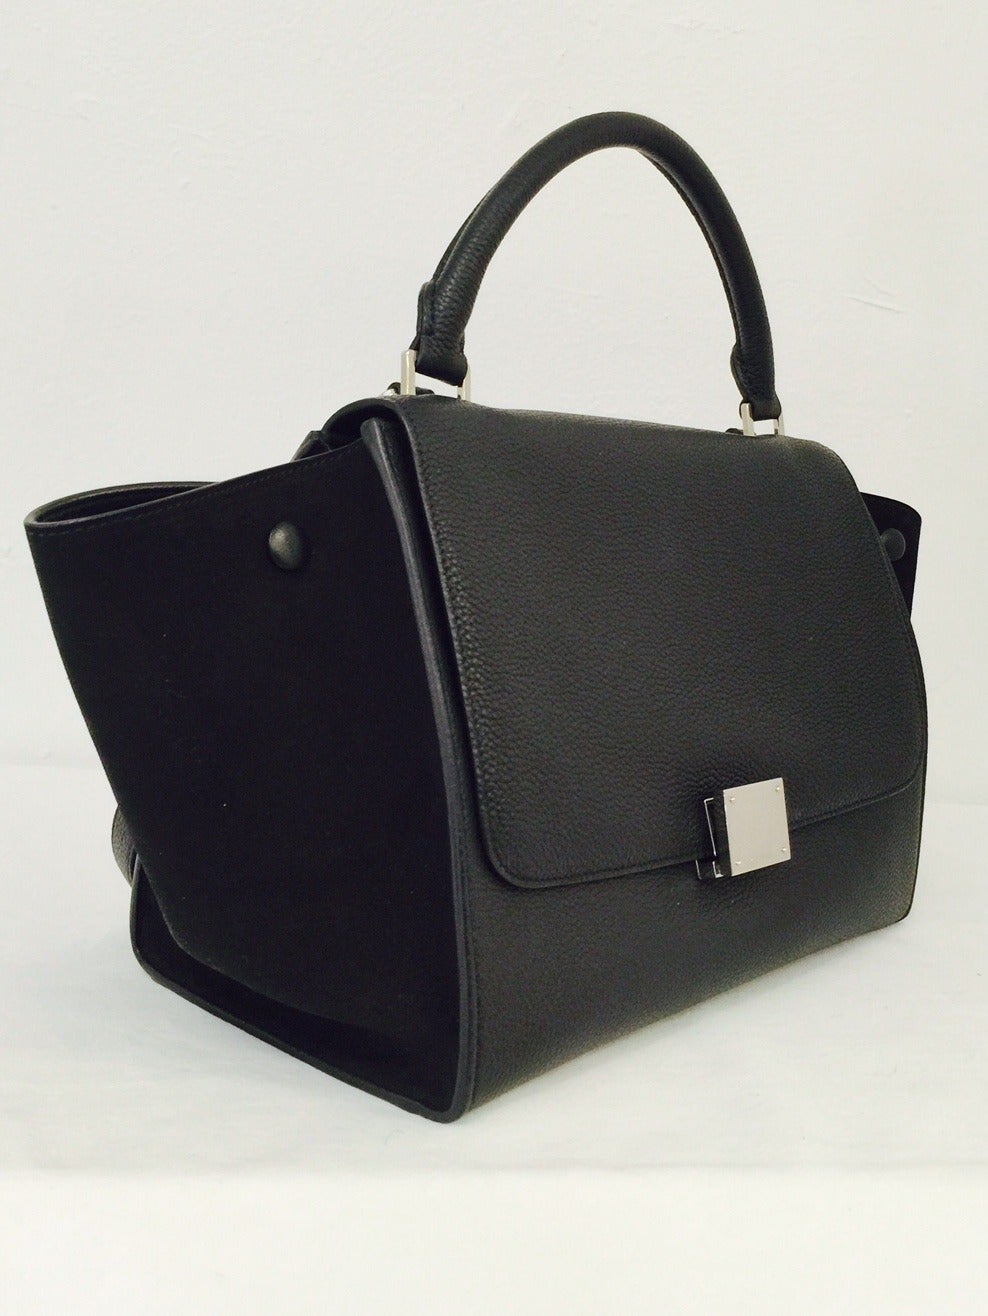 Coveted Celine Mini Trapeze Bag in Black In Excellent Condition For Sale In Palm Beach, FL